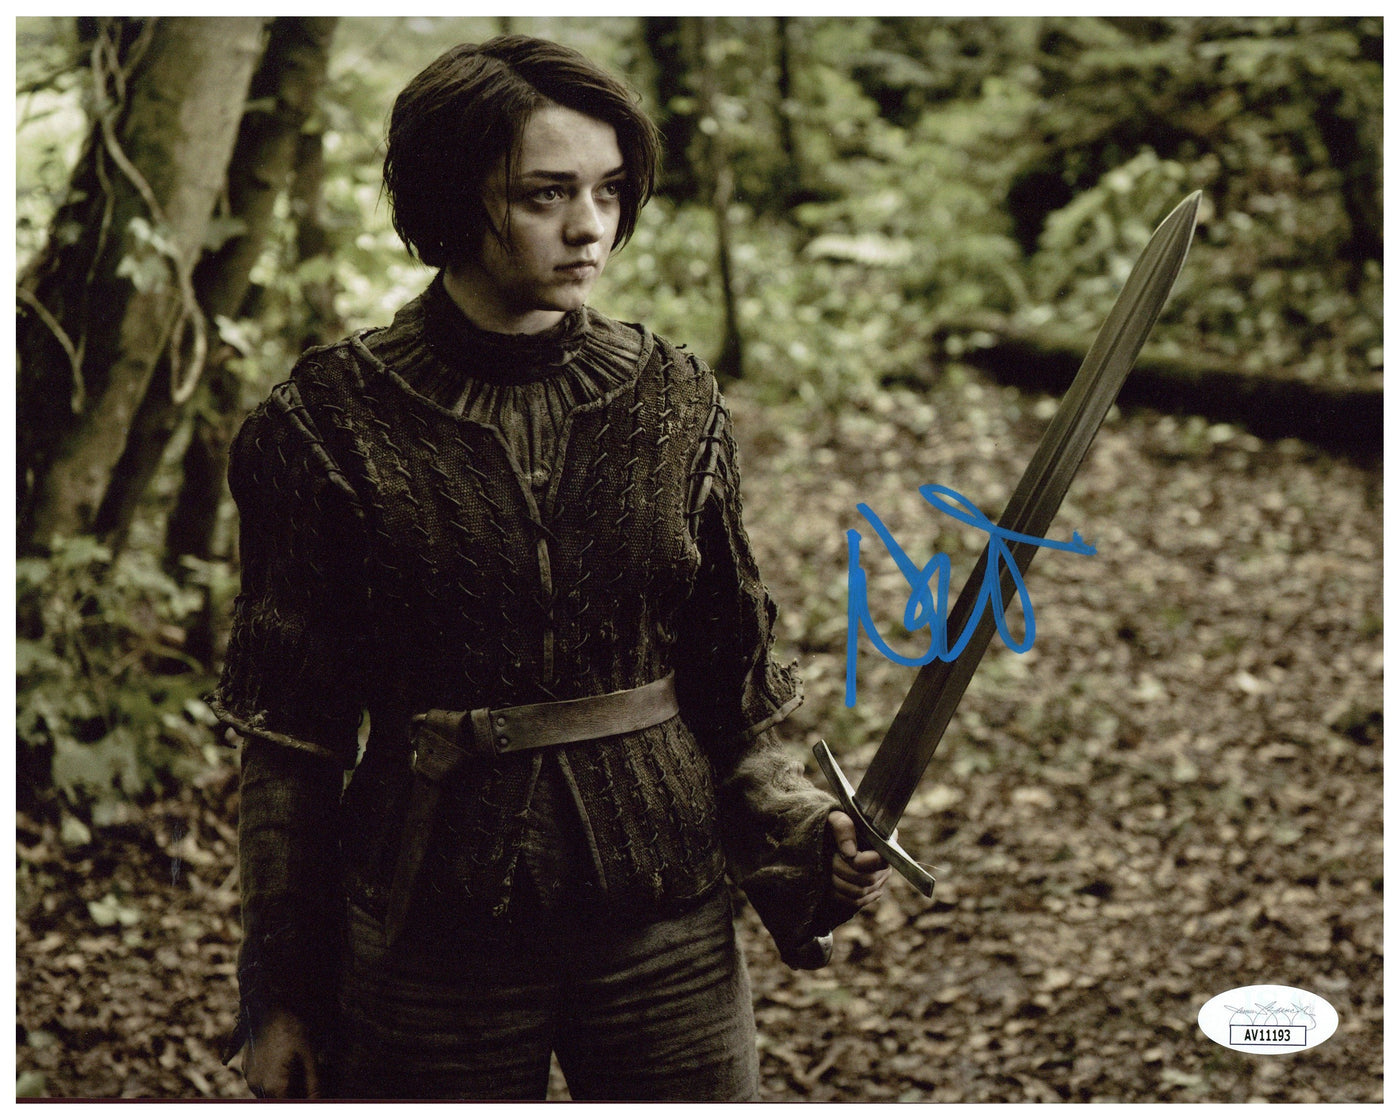 Maisie Williams Signed 8x10 Photo Game of Thrones Arya Autographed JSA COA 3